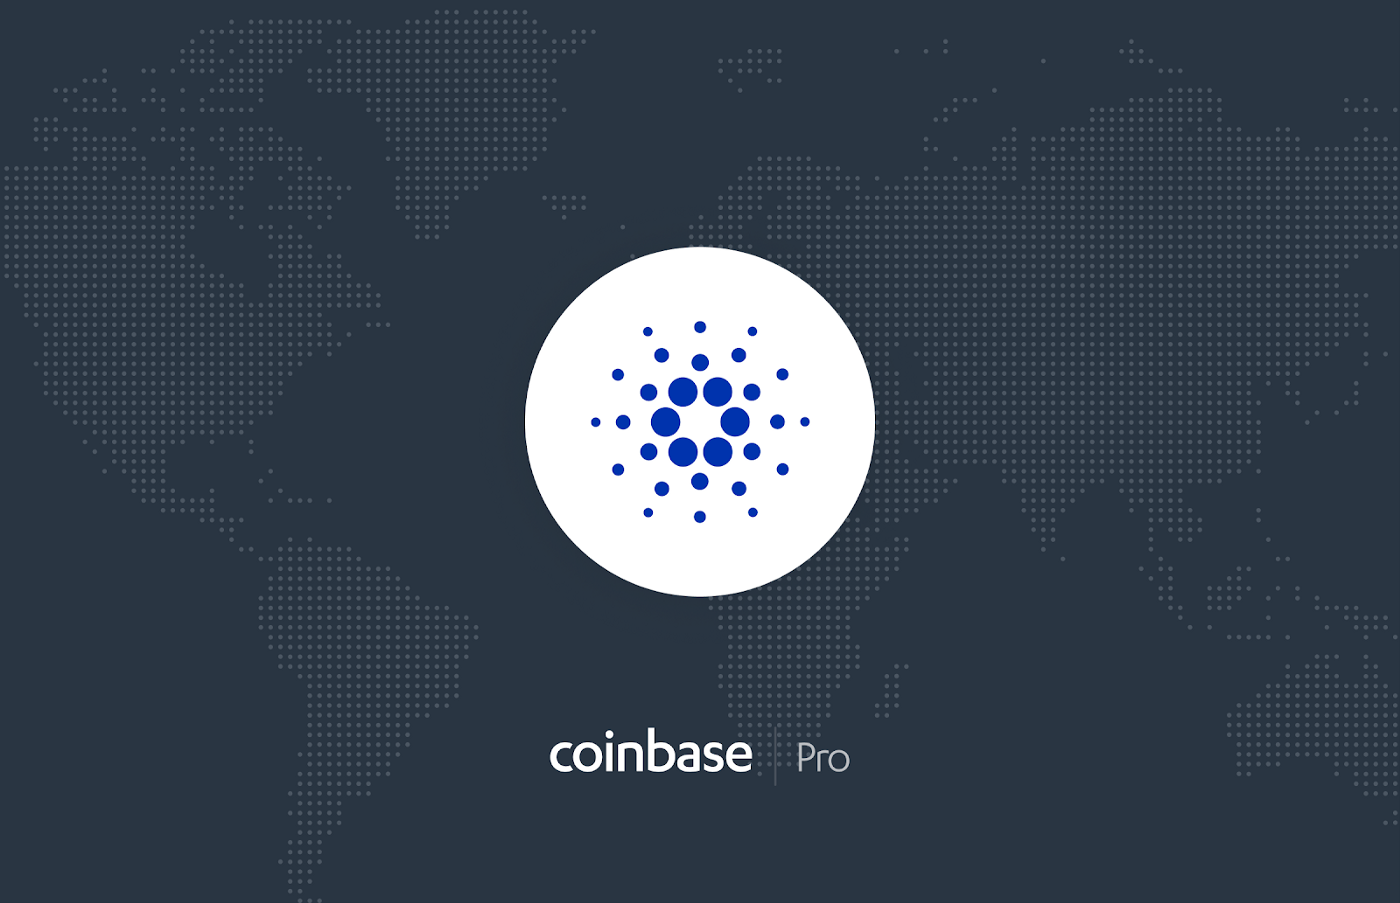 Cardano (ADA) is launching on Coinbase Pro